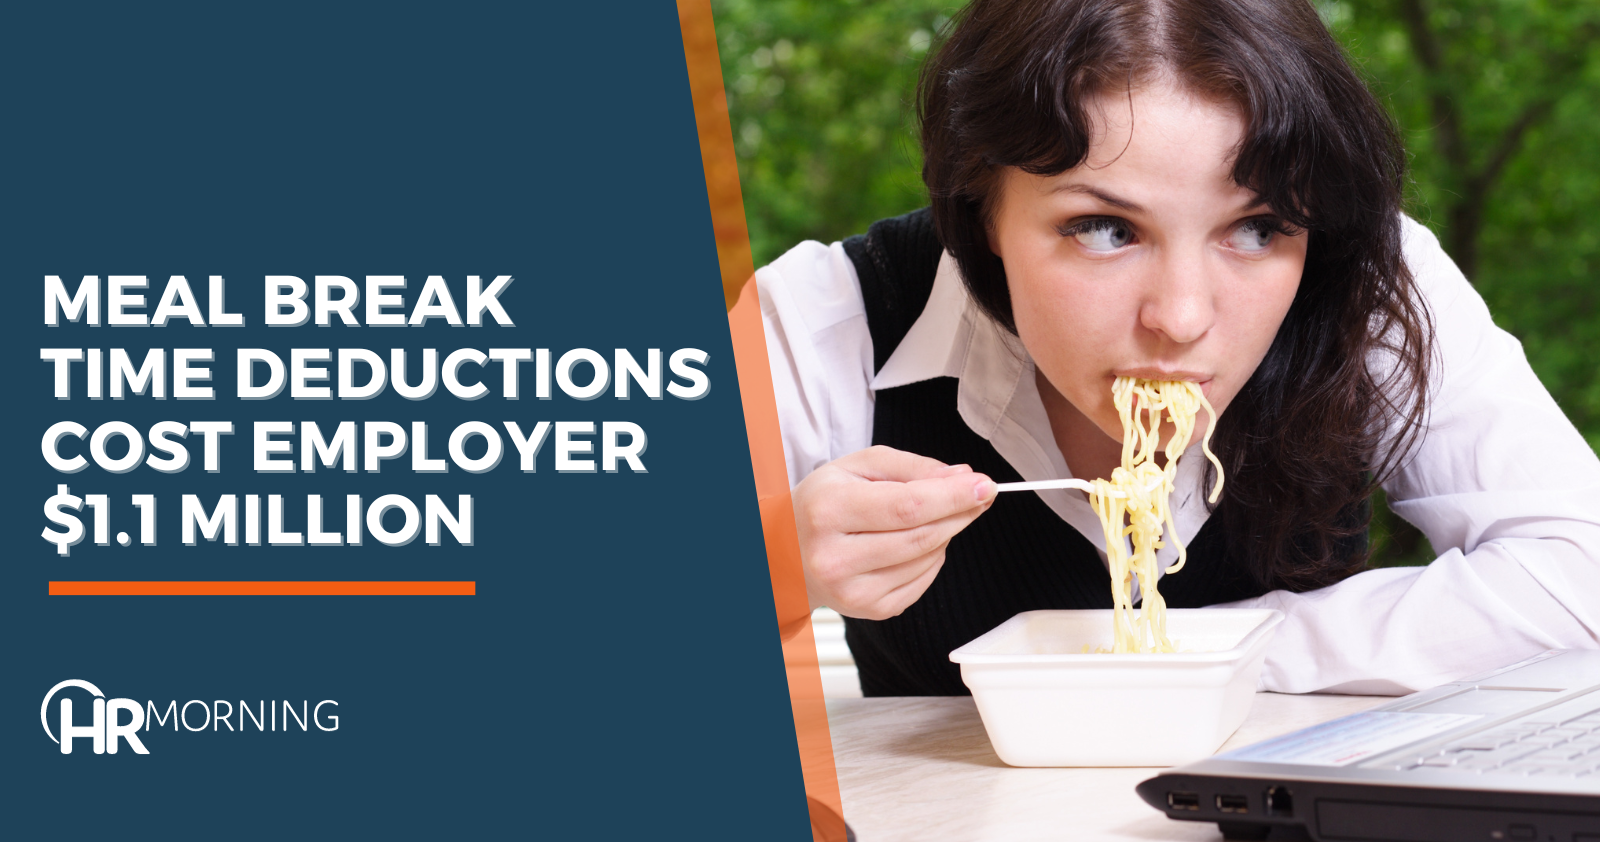 Meal break time deductions cost employer $1.1 million